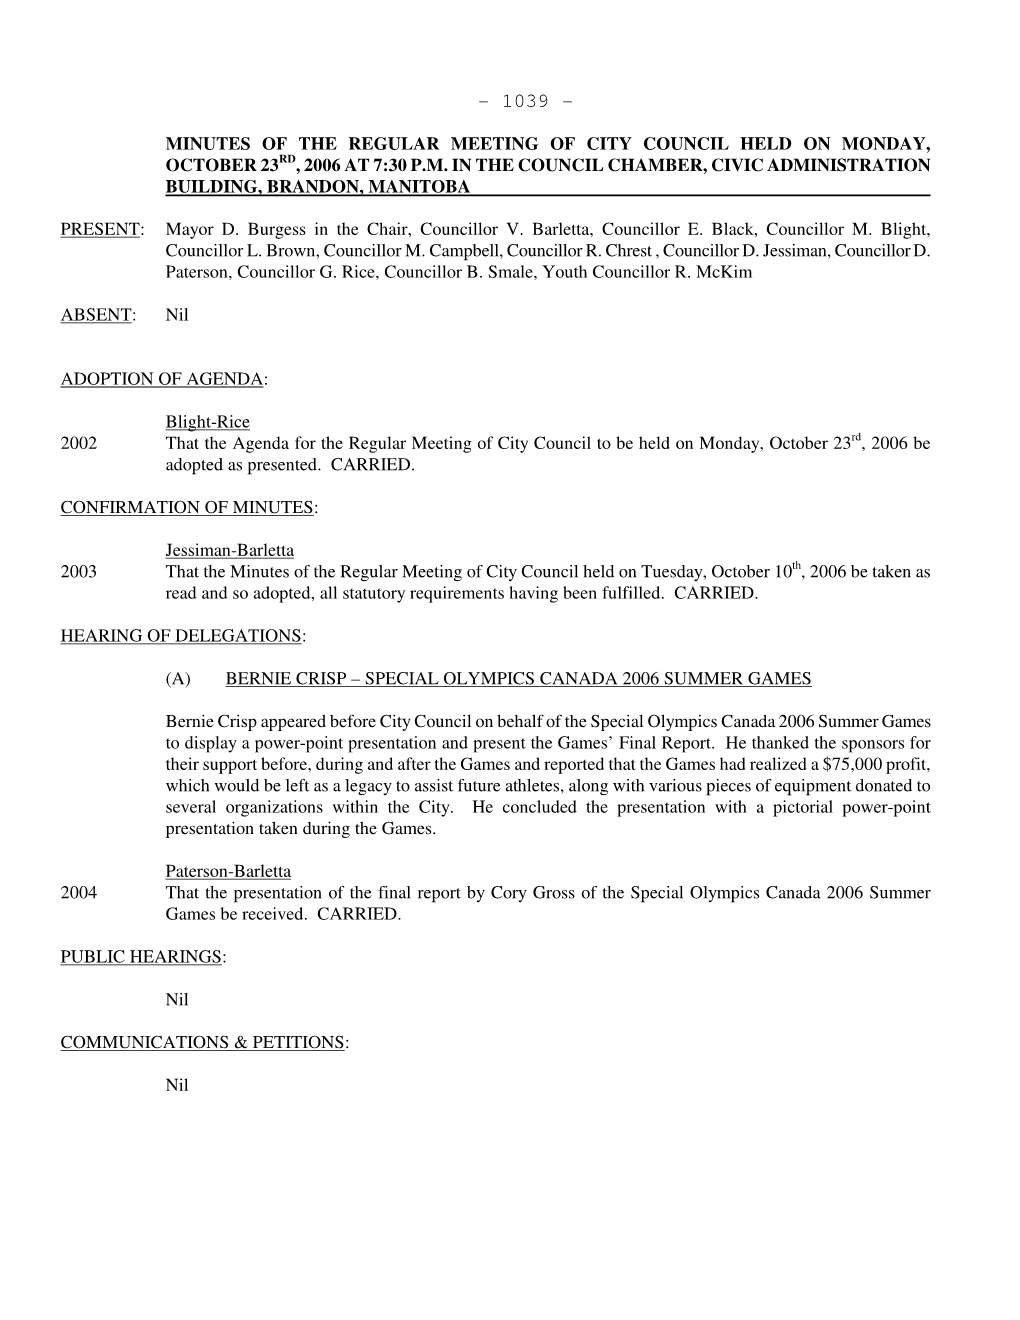 Minutes of the Regular Meeting of City Council Held on Monday, October 23 Rd , 2006 at 7:30 P.M